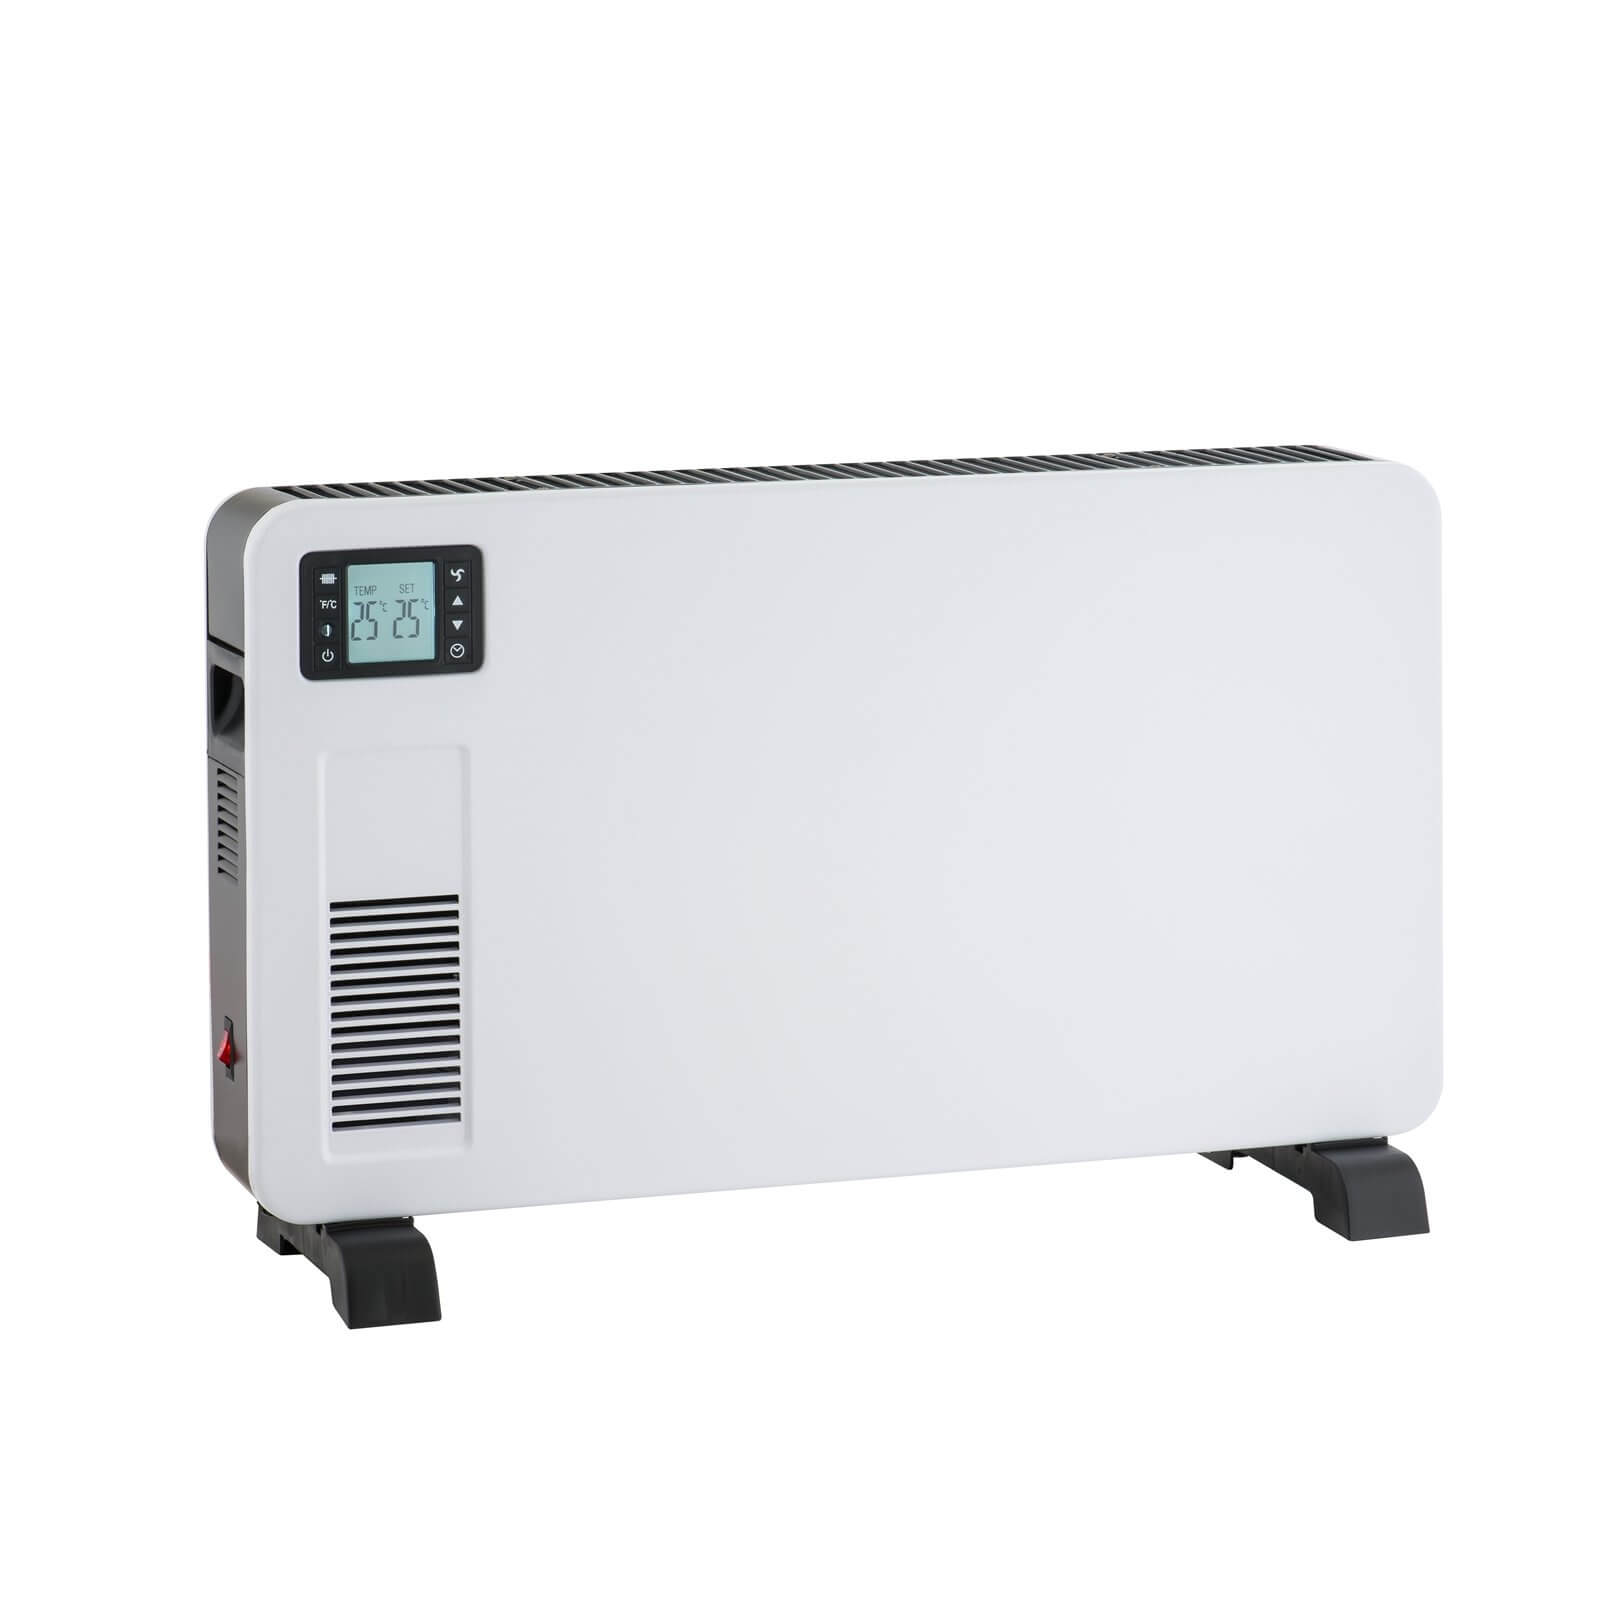 2300W Convection Heater with LCD Display